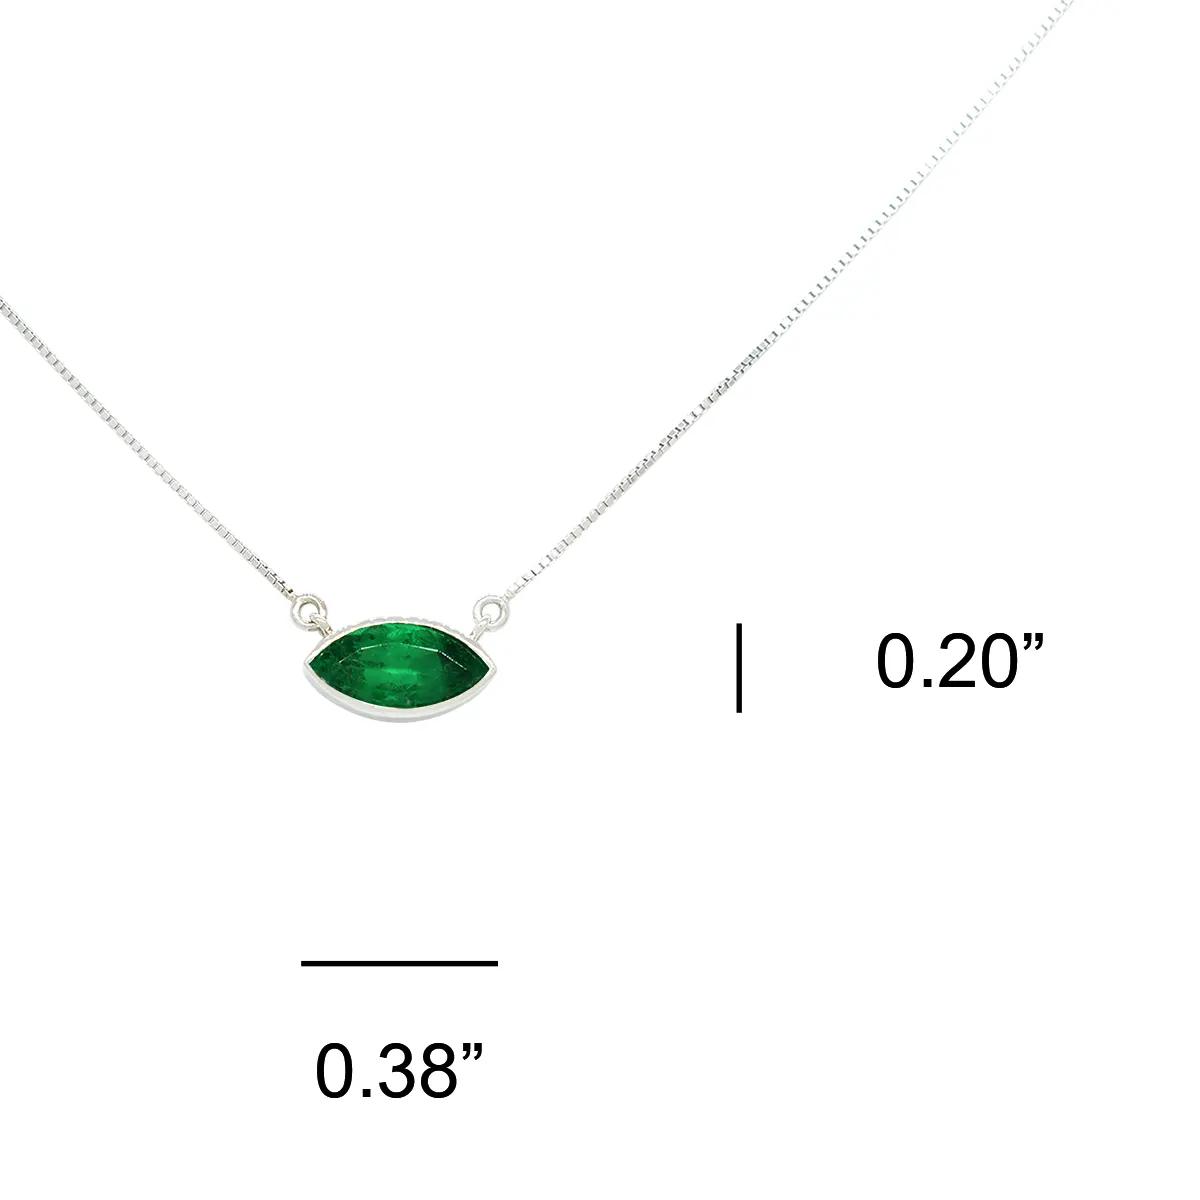 The marquise shape emerald is set as the centerpiece of this necklace and joined to a durable 18 inches long box chain. The dimensions of the centerpiece are 0.20 inches high by 0.38 inches wide